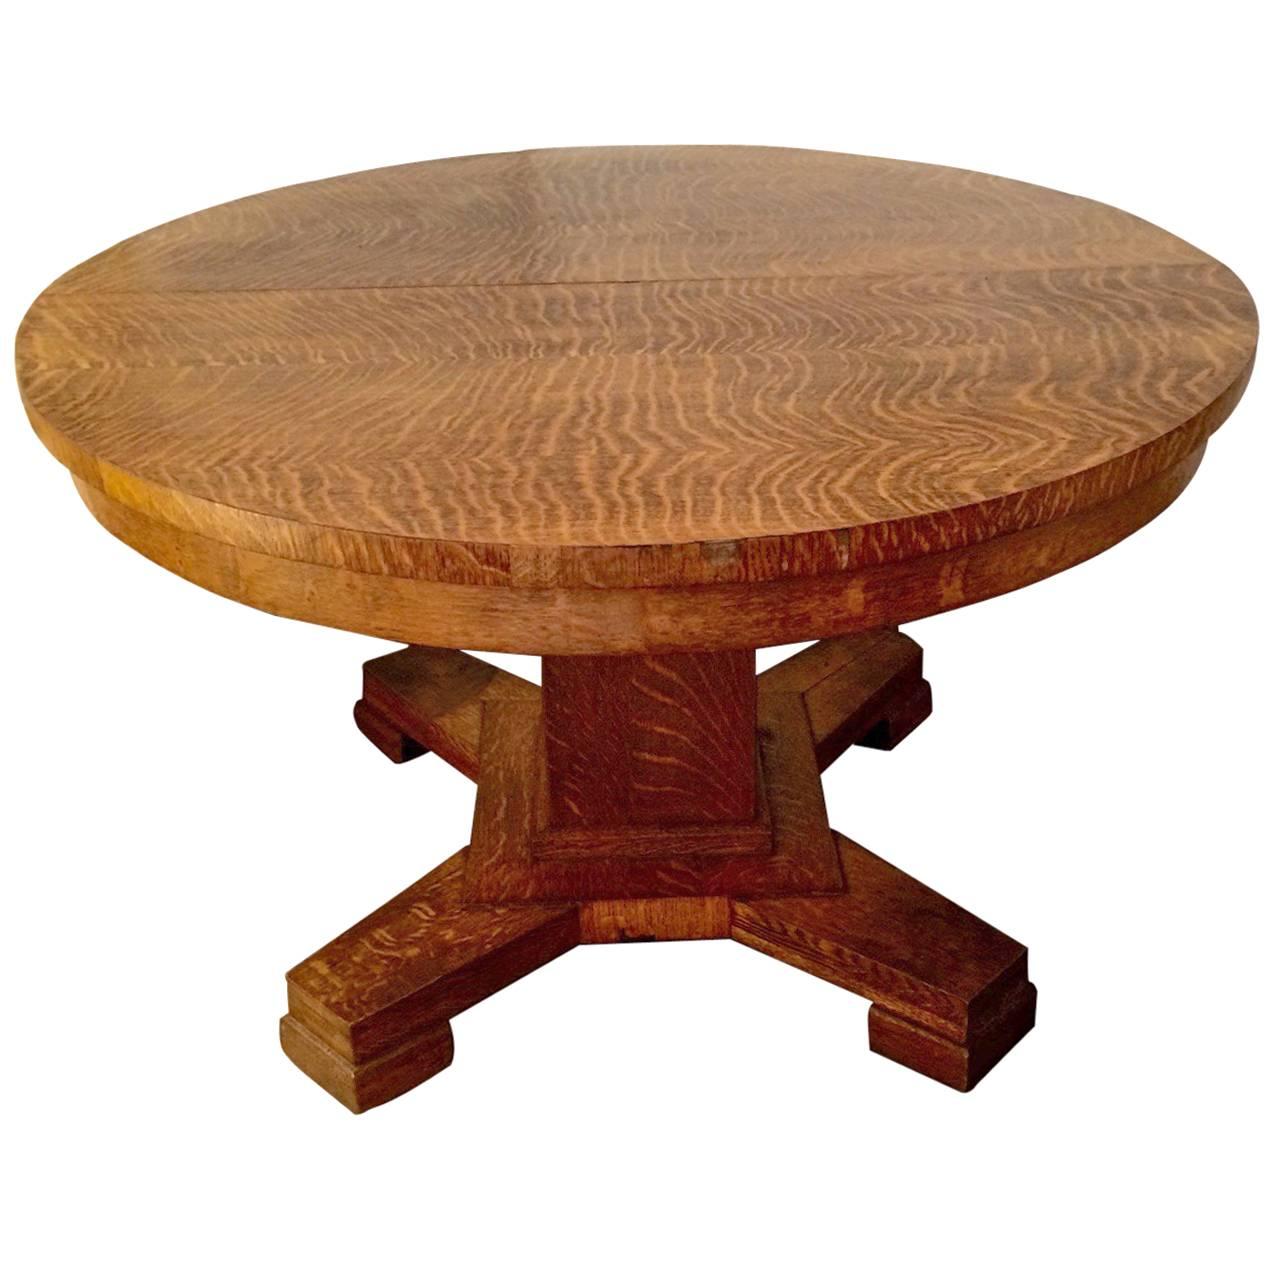 Arts and Crafts Style Round Zebra Grain Dining Table